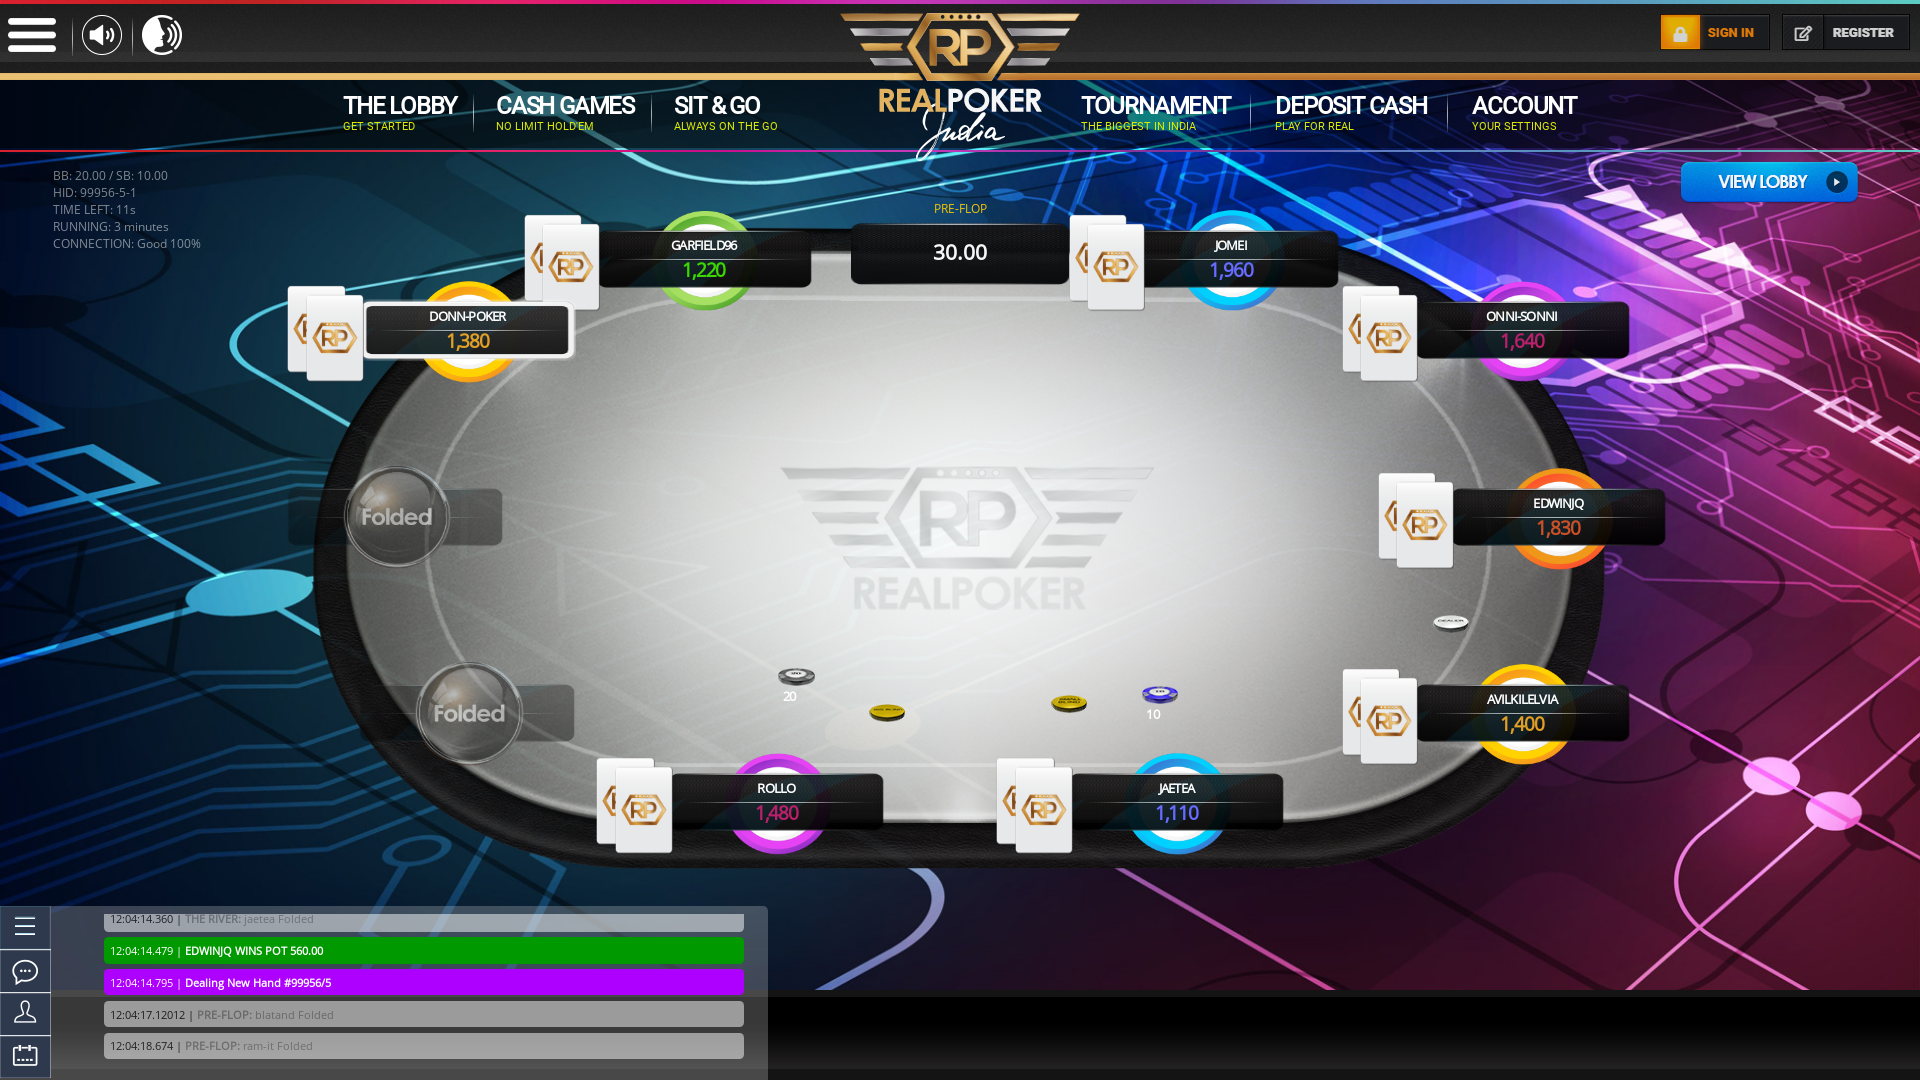 Bhubaneswar 10 player poker in the 3rd minute